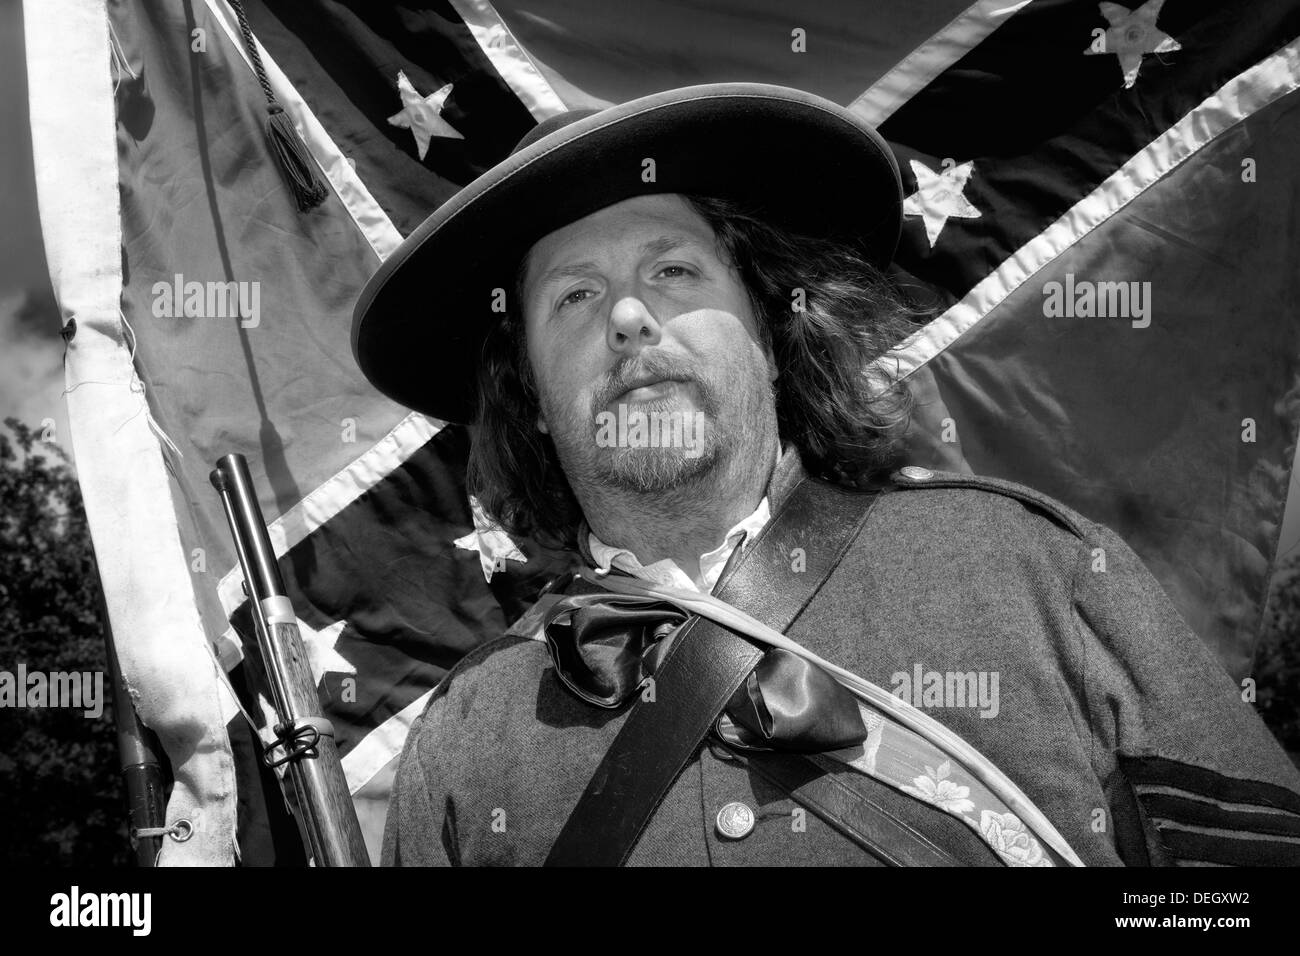 Peter Wemyss, Uniformed military Sergeant in the Confederate army camp American Civil War Re-enactment Society,  Ingleton event, UK Stock Photo